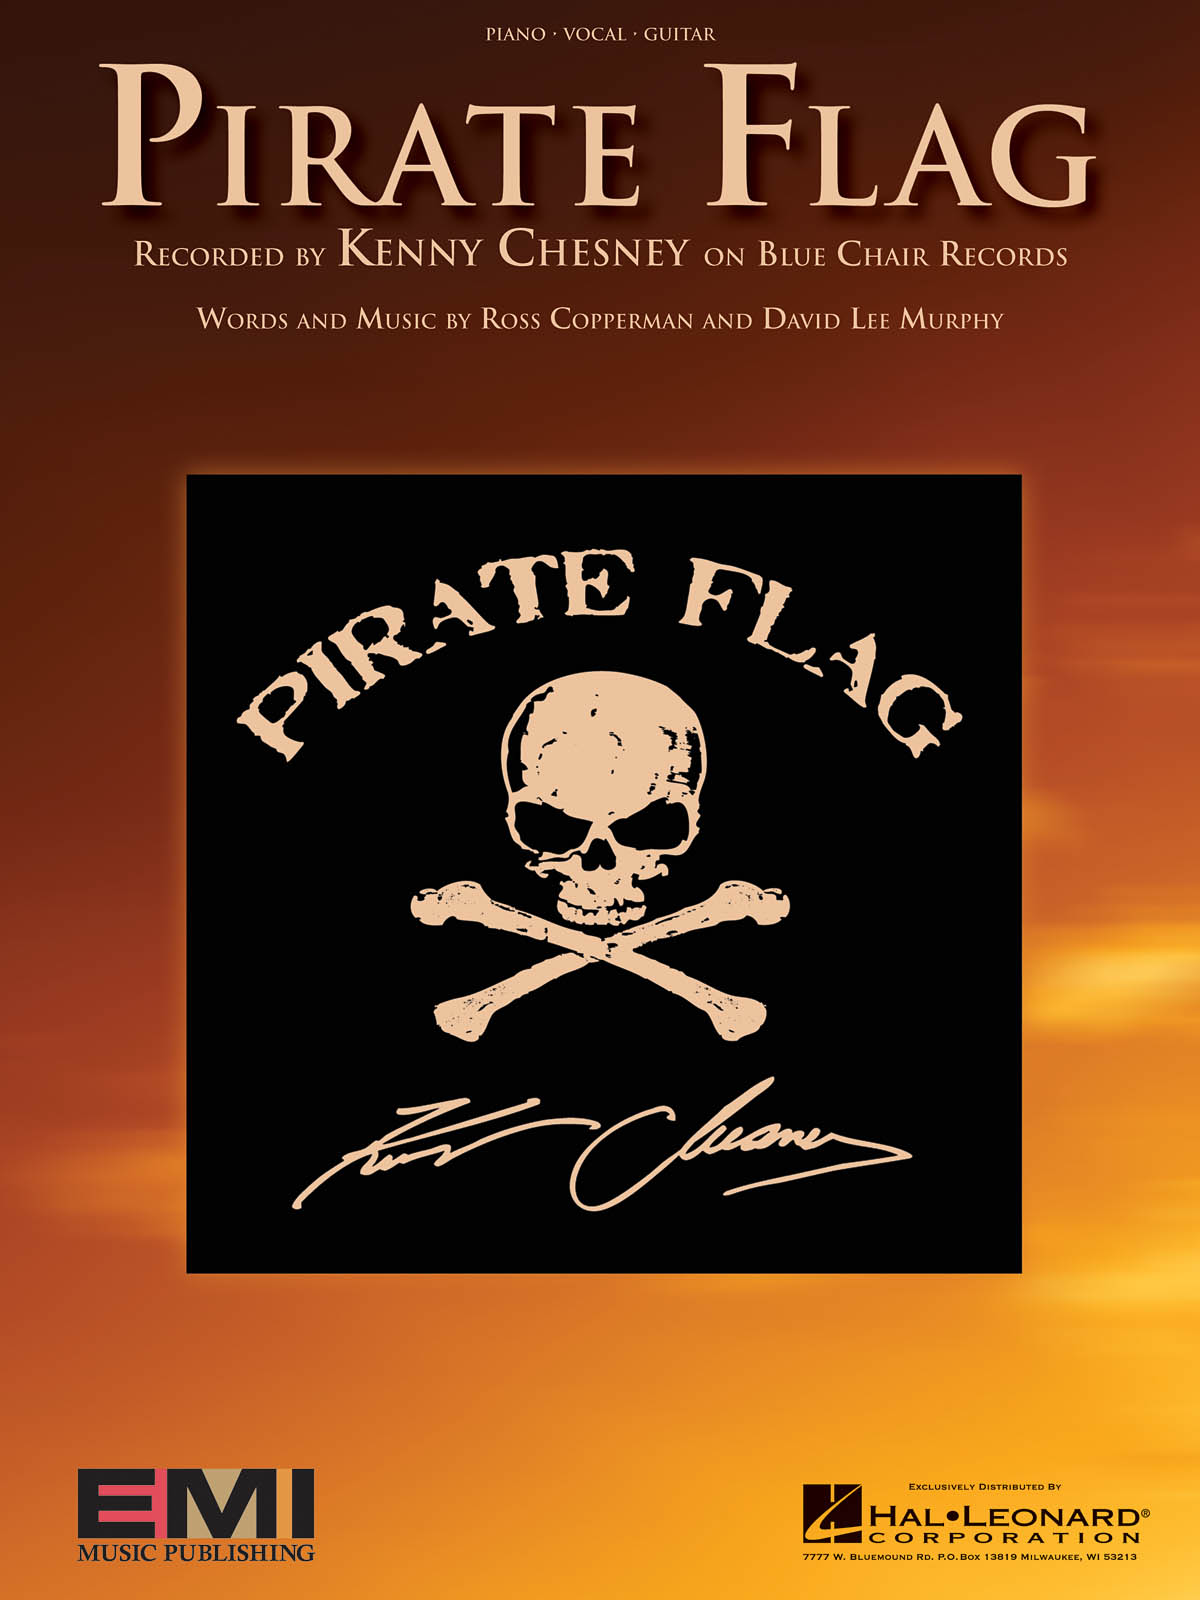 Kenny Chesney: Pirate Flag: Piano  Vocal and Guitar: Mixed Songbook